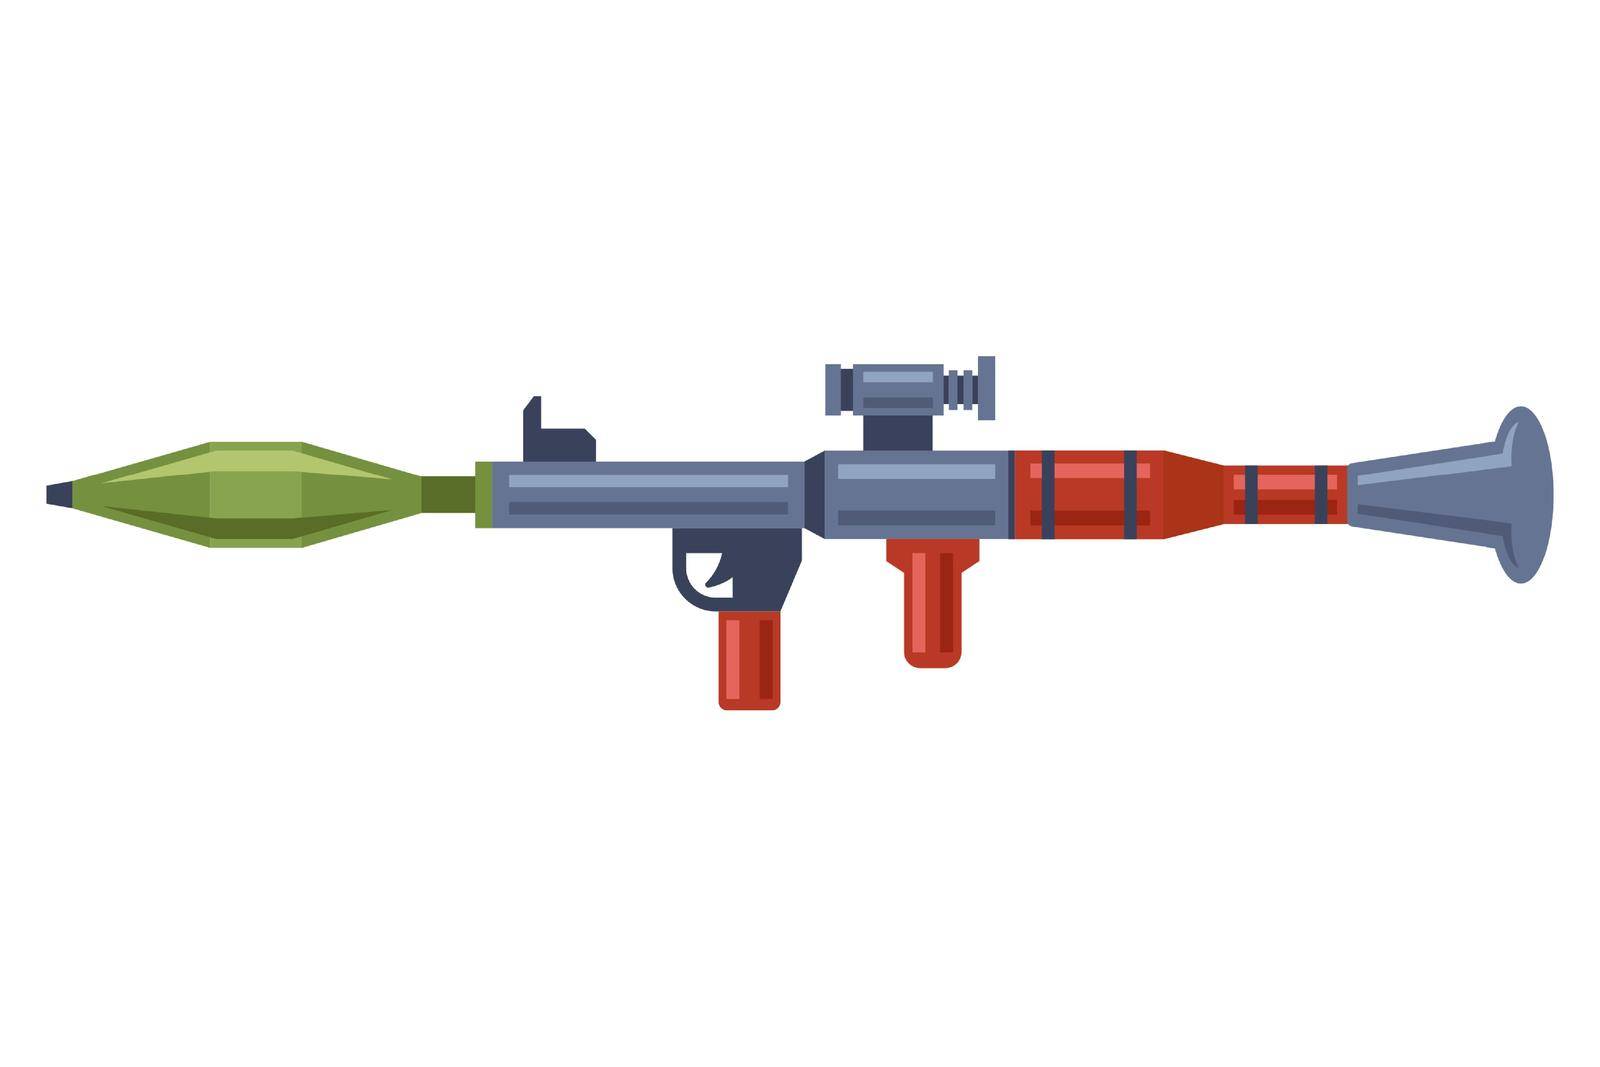 obsolete soviet grenade launcher. anti-tank weapons. by PlutusART